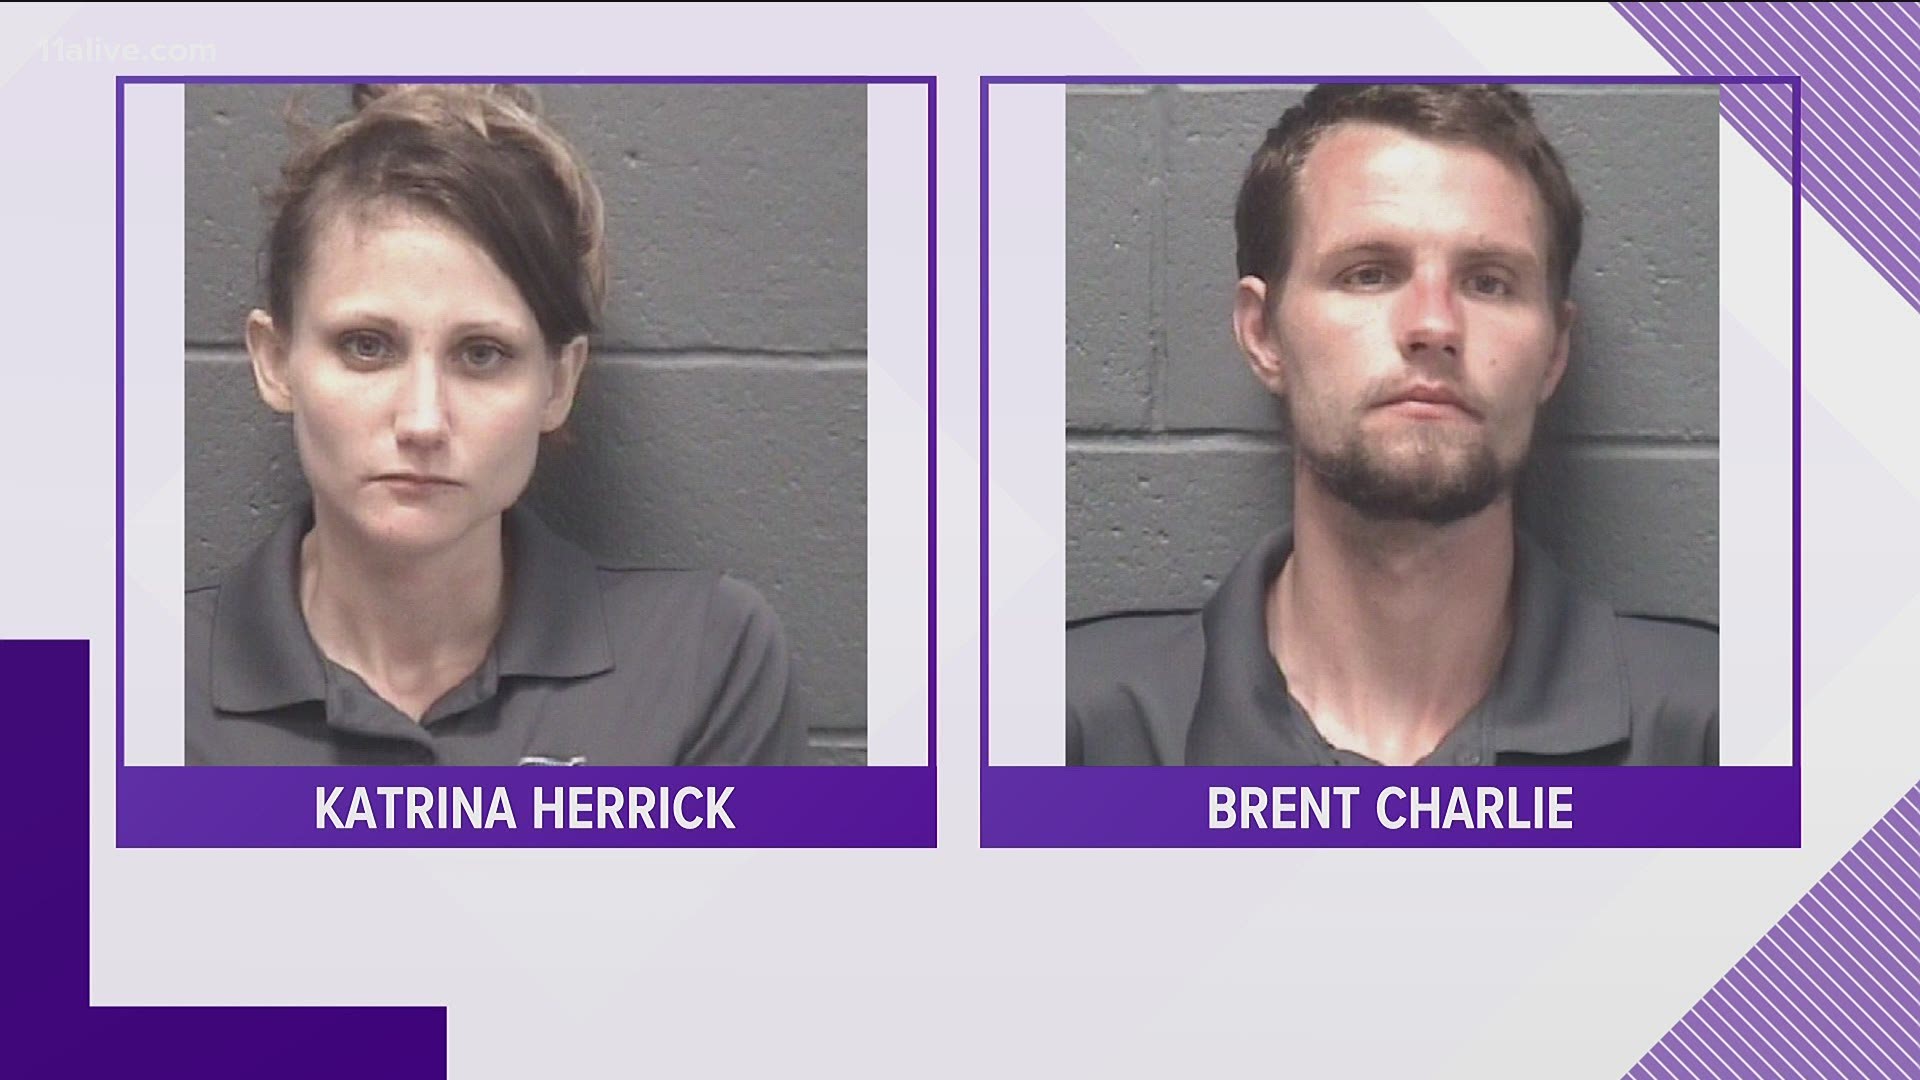 Authorities said they found several bags of meth in the suspects' car.